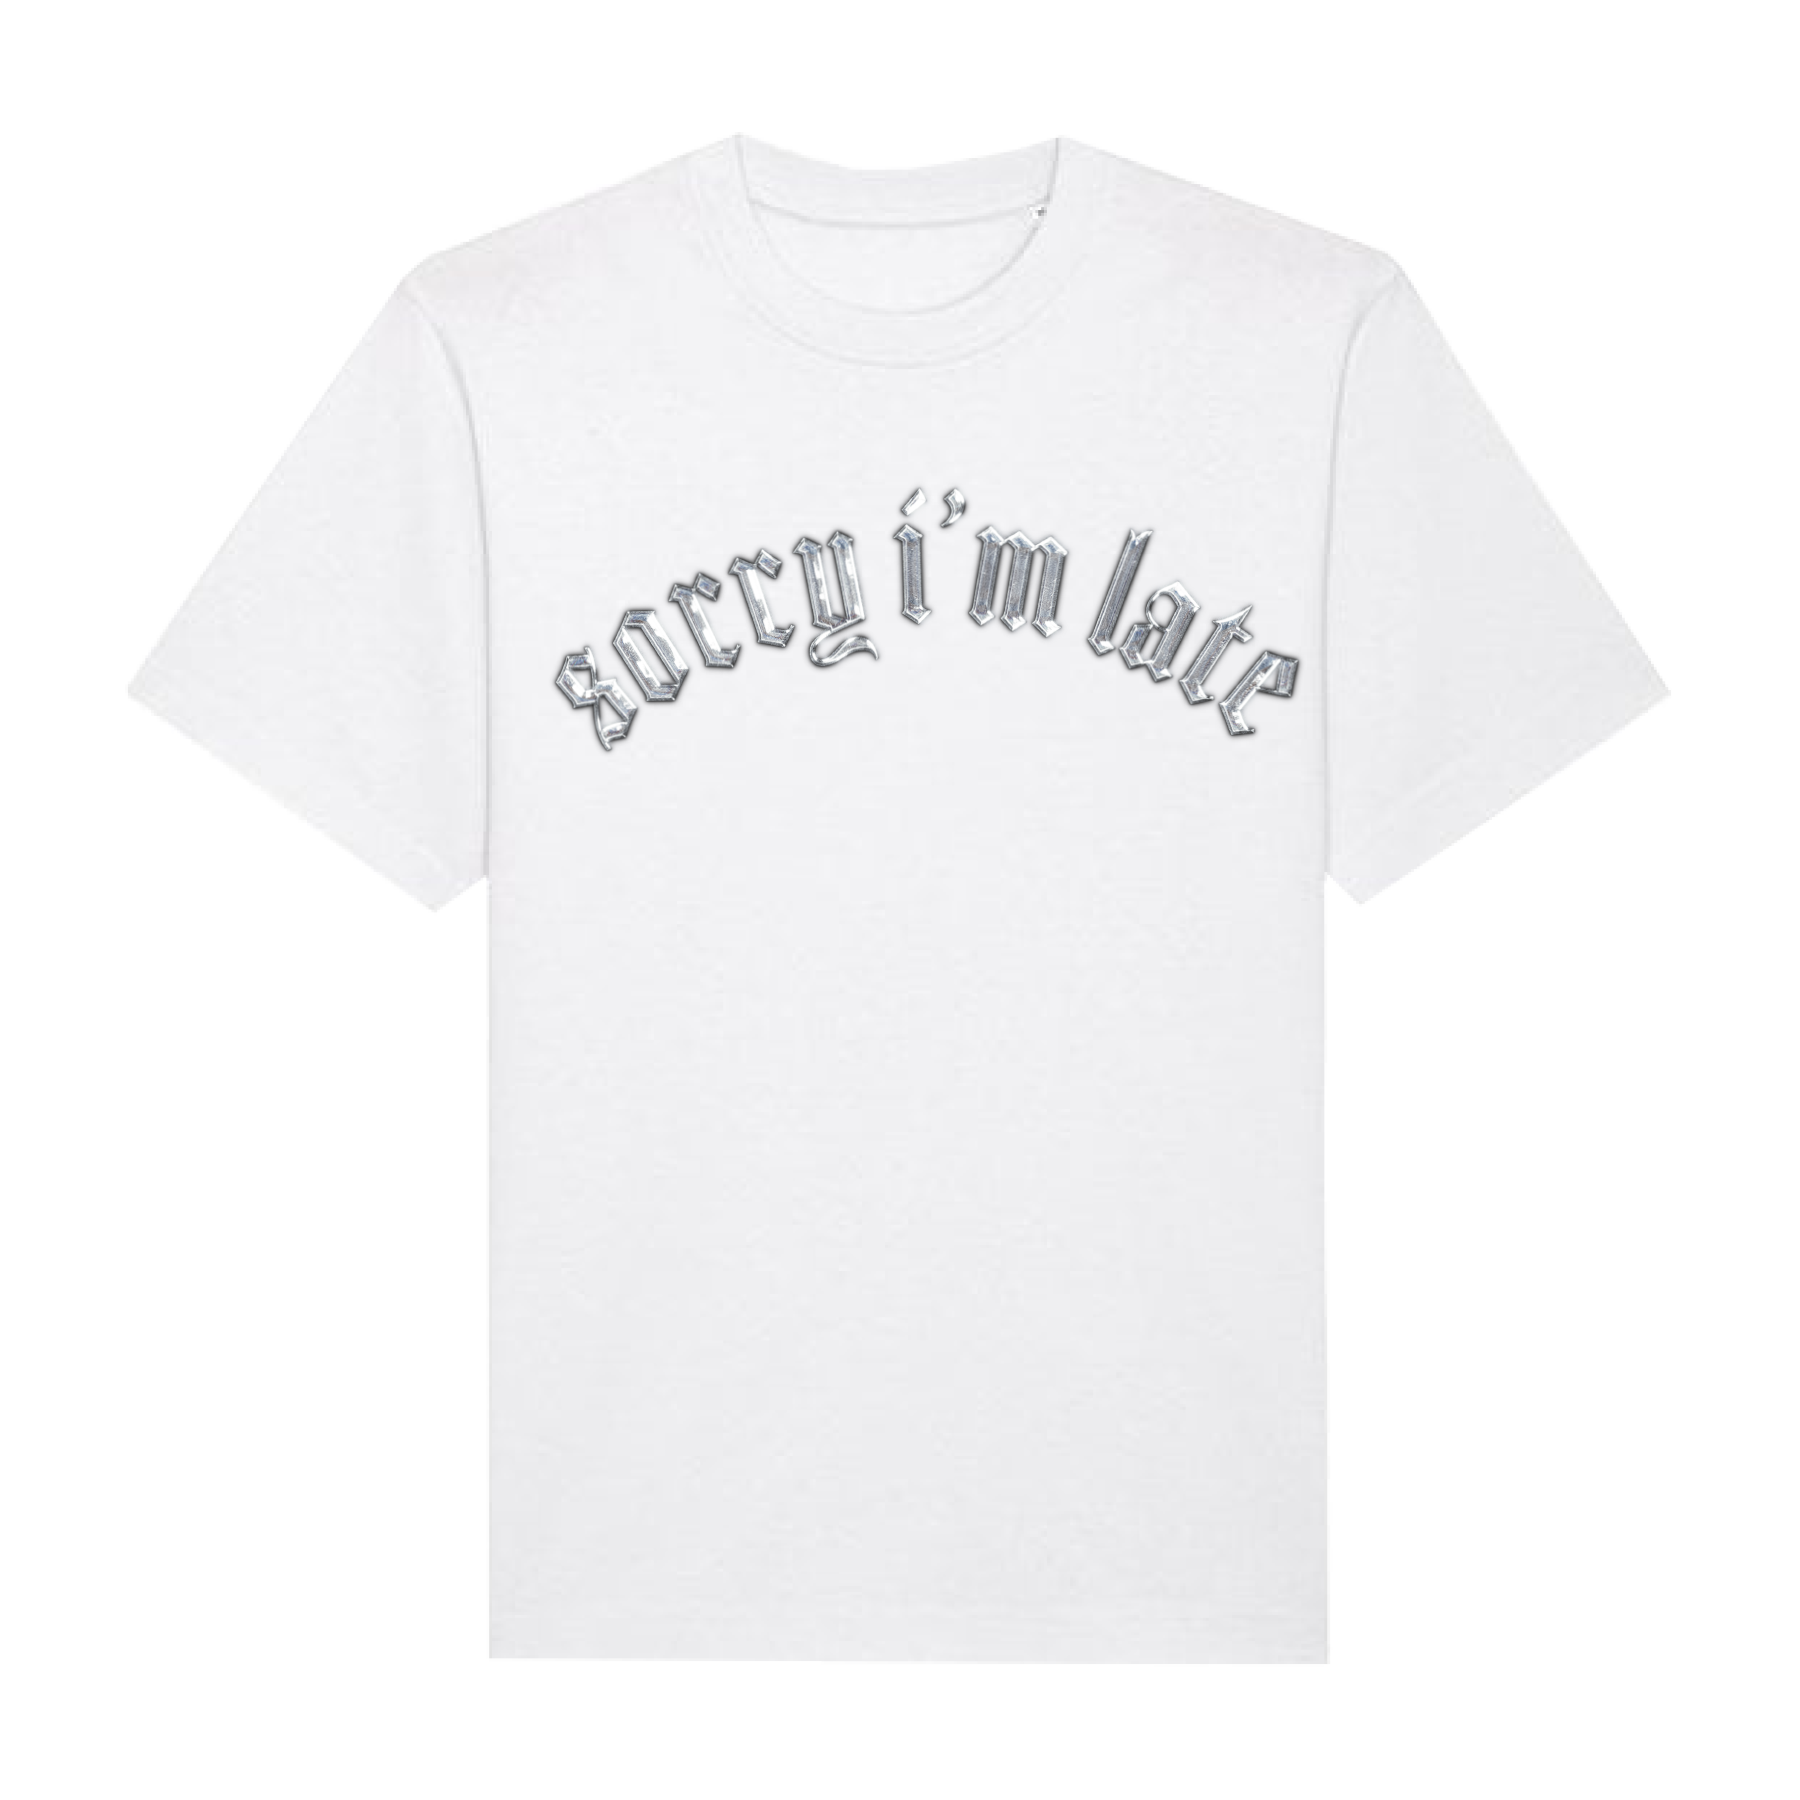 Mae Muller - Sorry I'm Late White T-Shirt